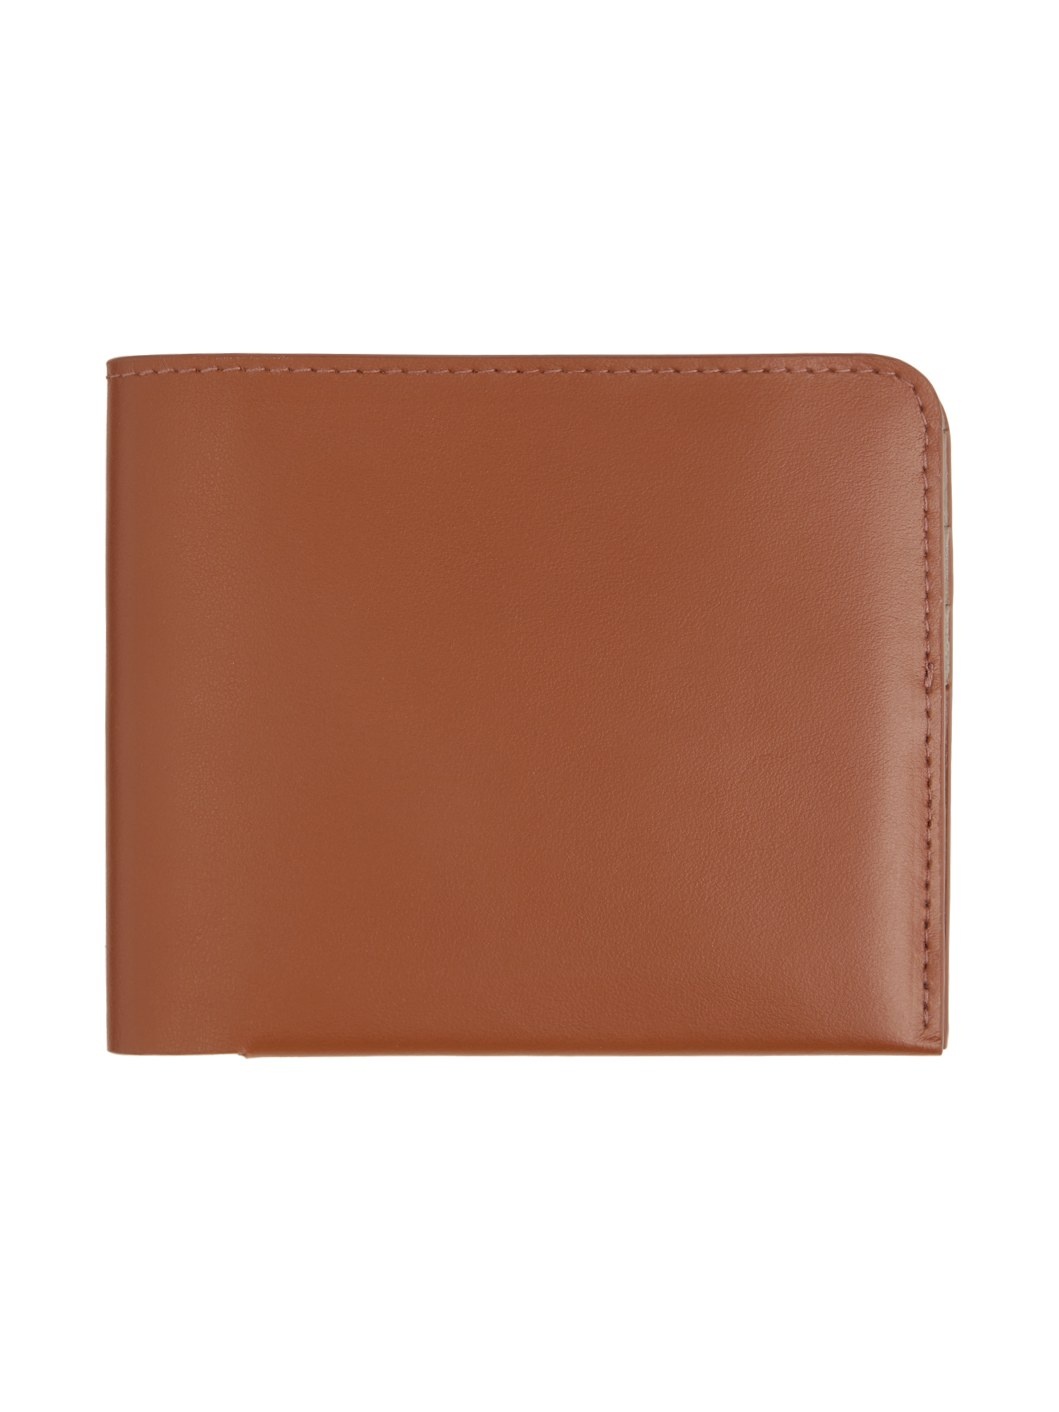 Tan Leather Wallet - 1